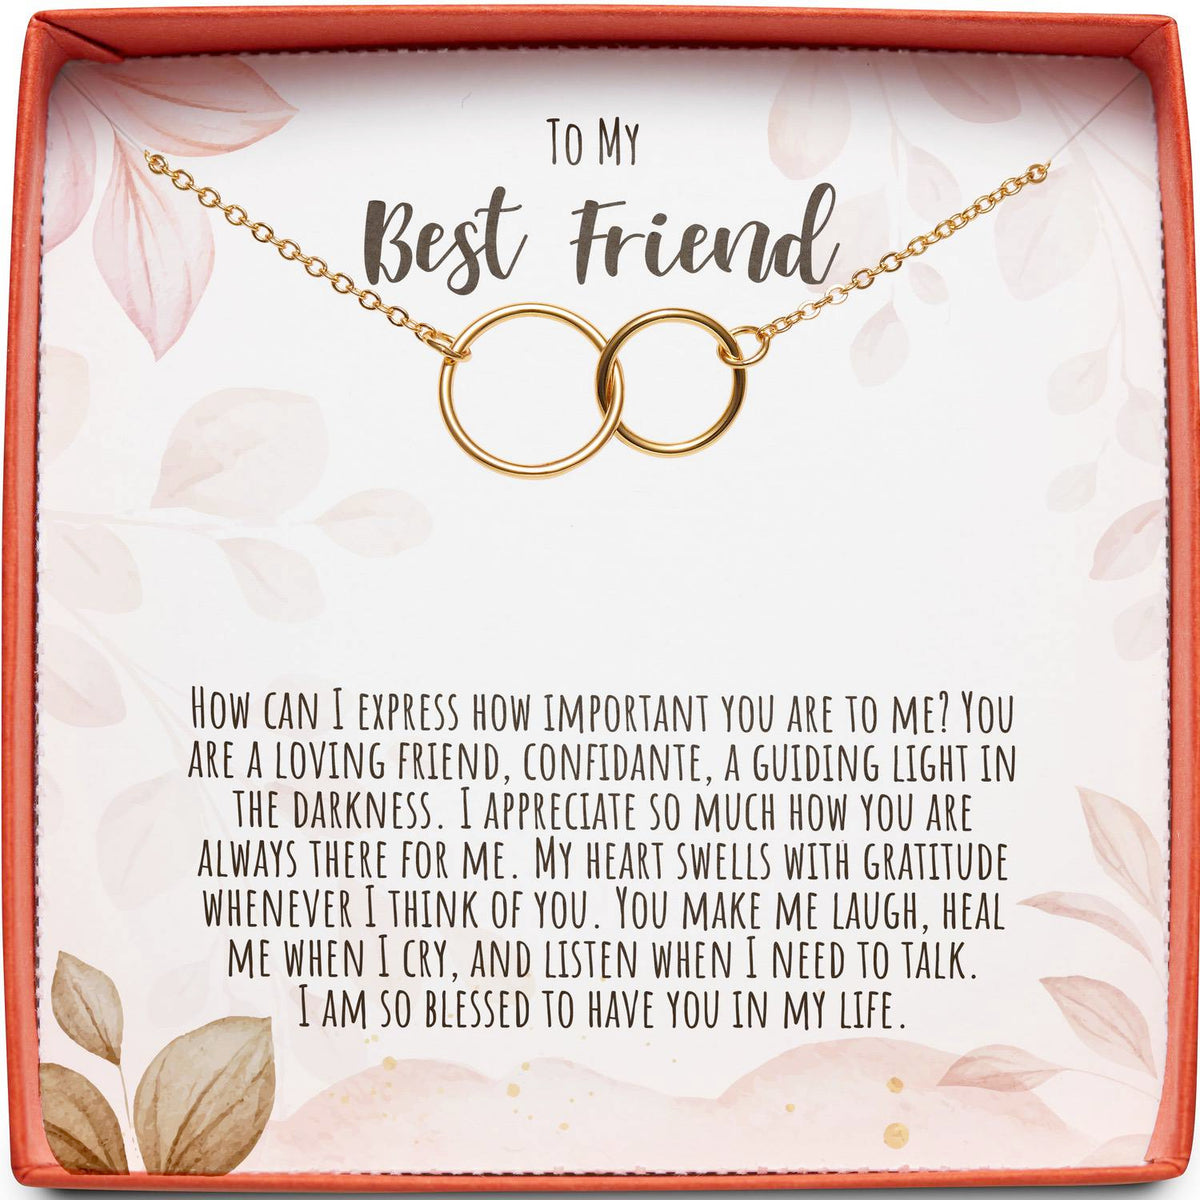 To My Best Friend | Guiding Light in the Darkness | Interlocking Circles